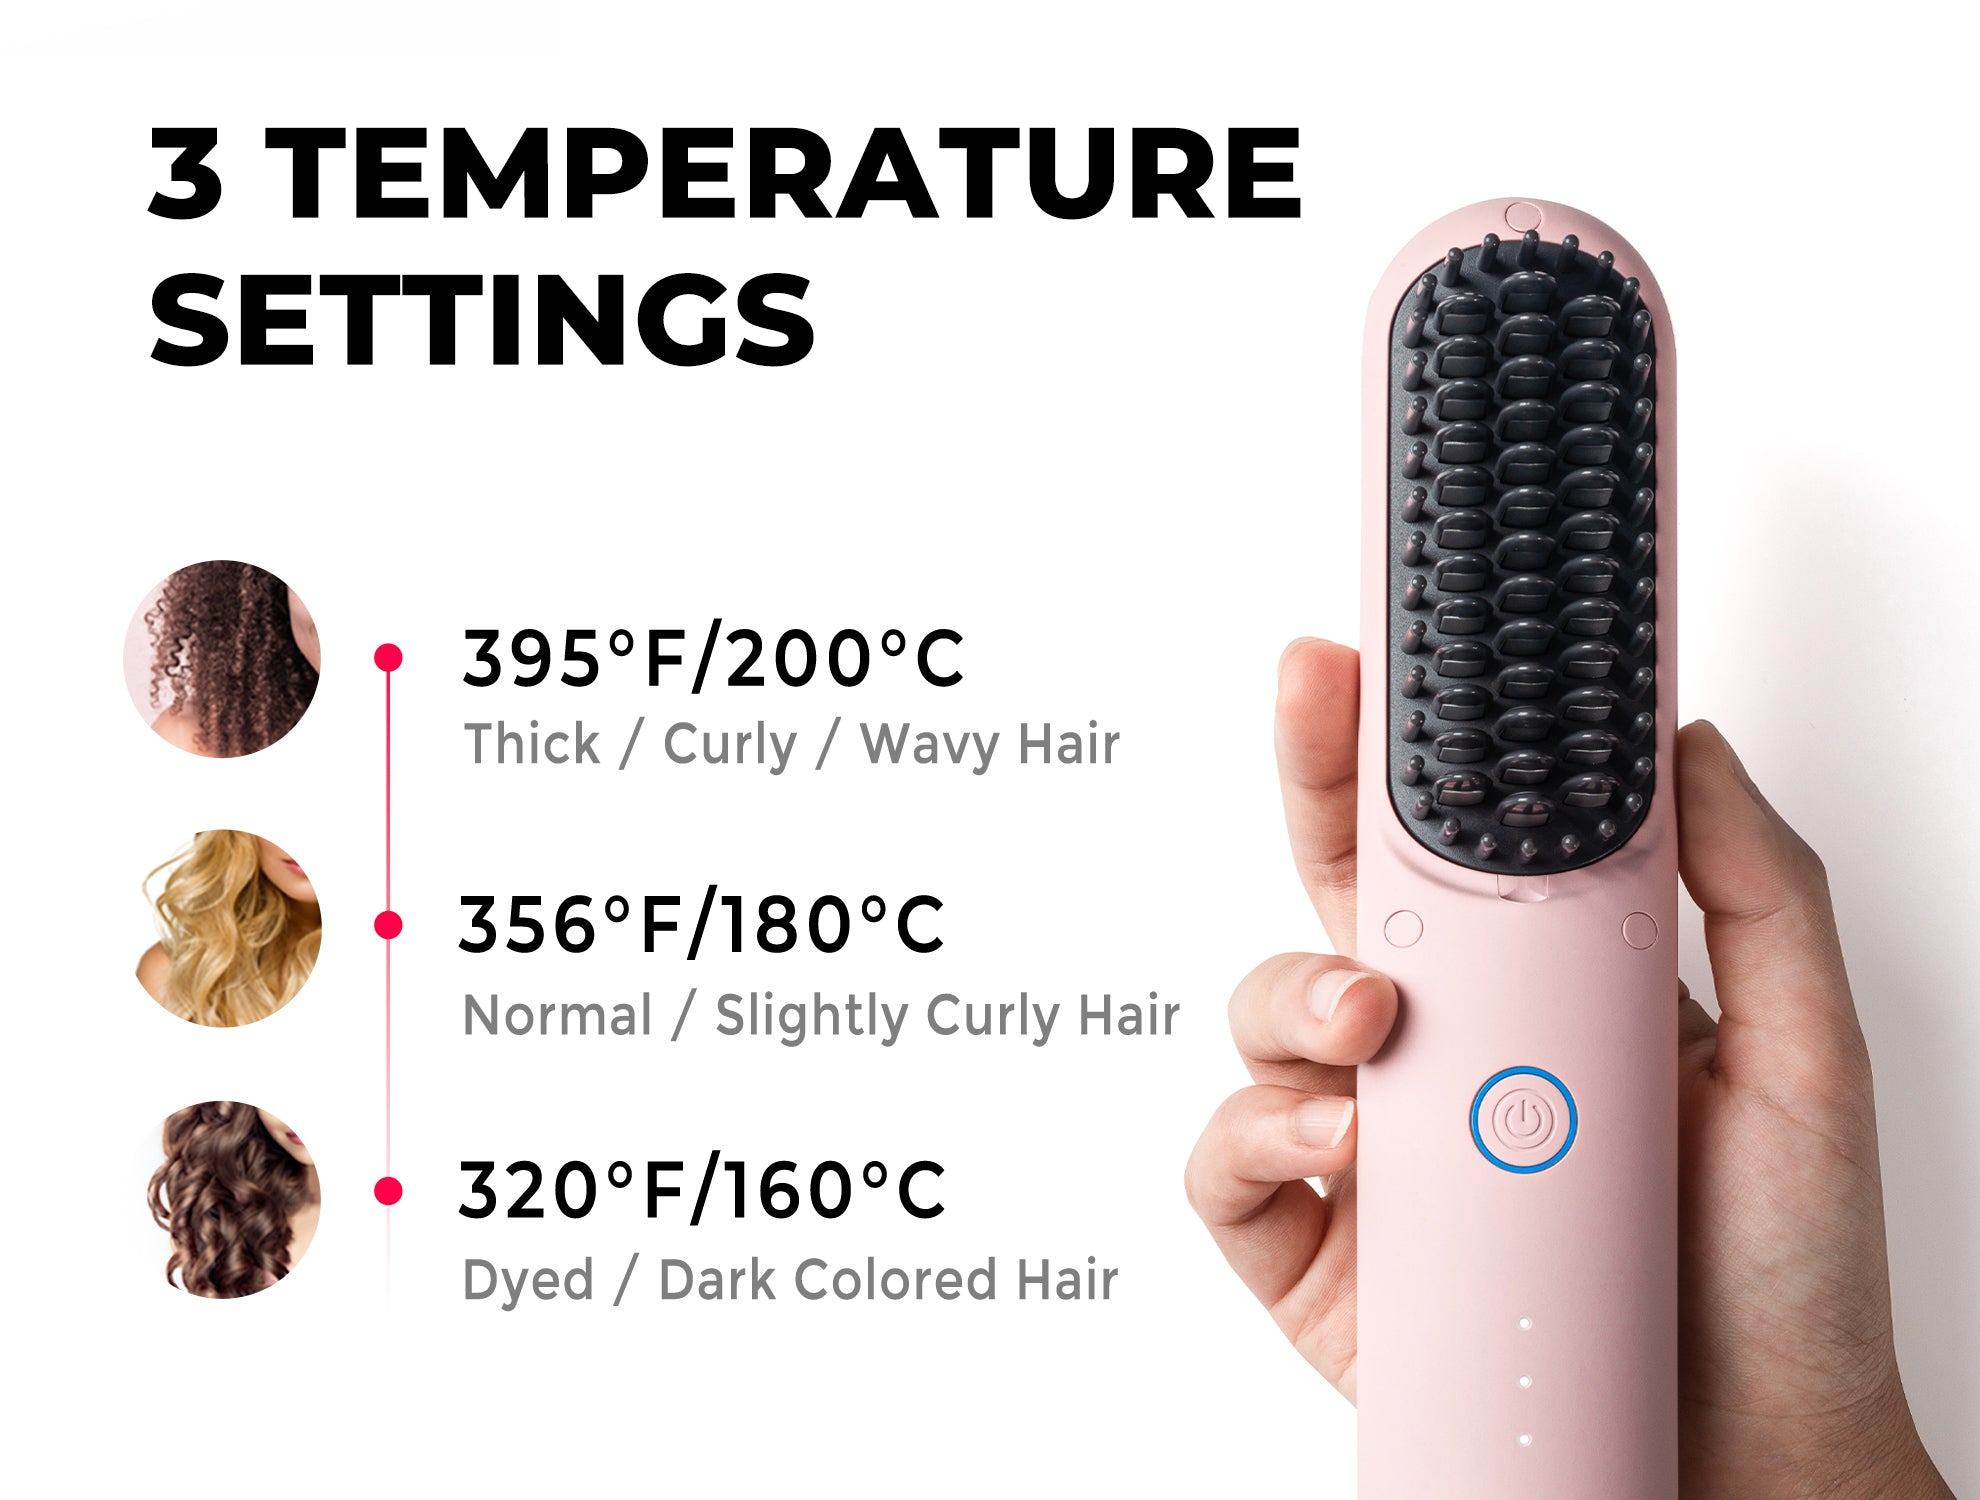 Porta by TYMO Portable Hair Straightening & Curling Brush – Never Say Die  Beauty